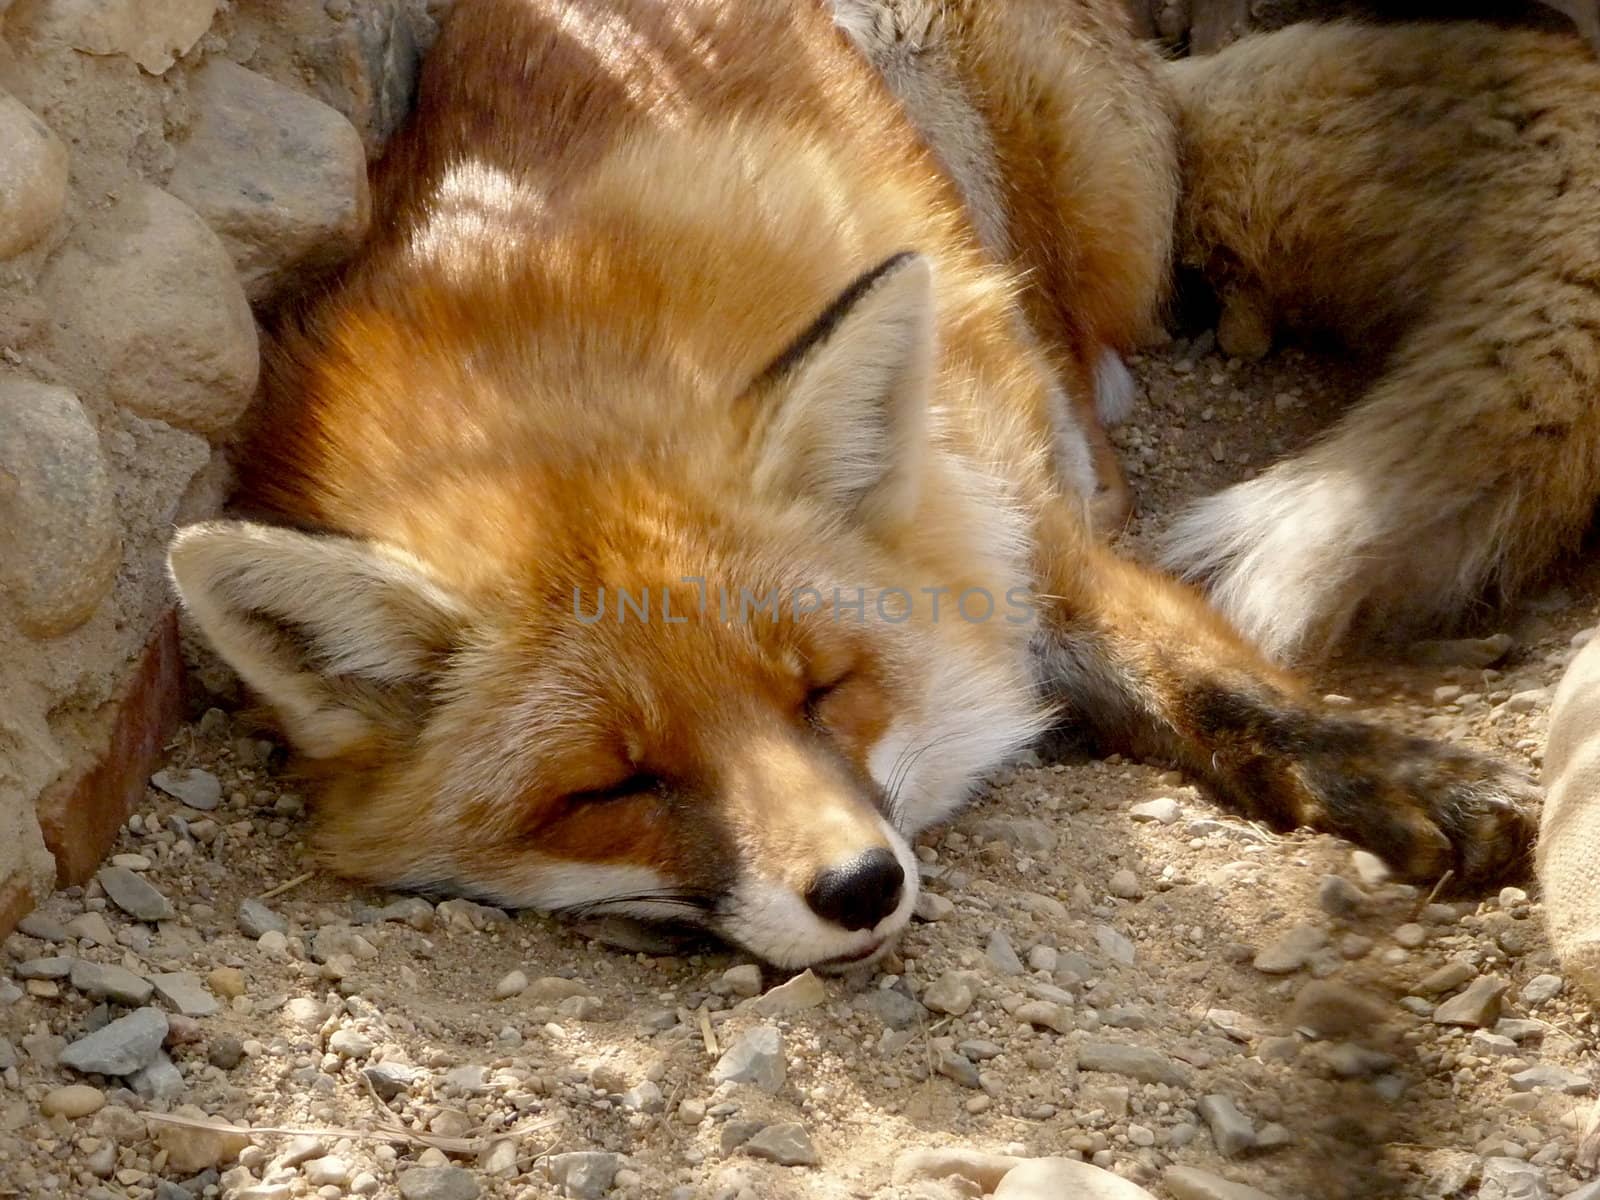 Colorful sleeping red fox on the ground